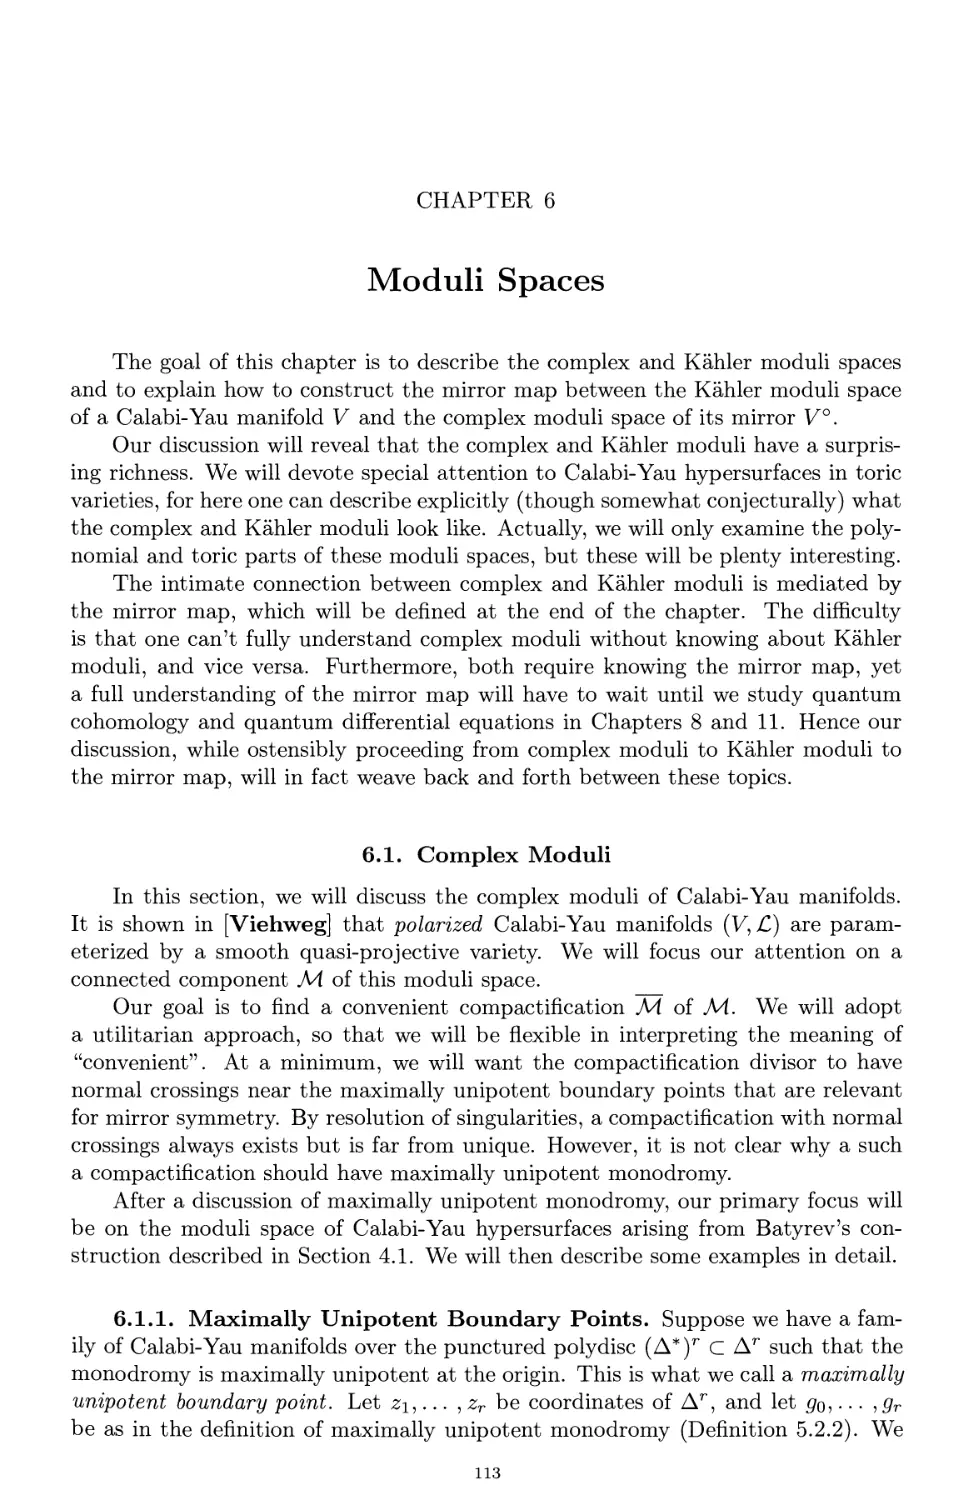 Chapter 6. Moduli Spaces